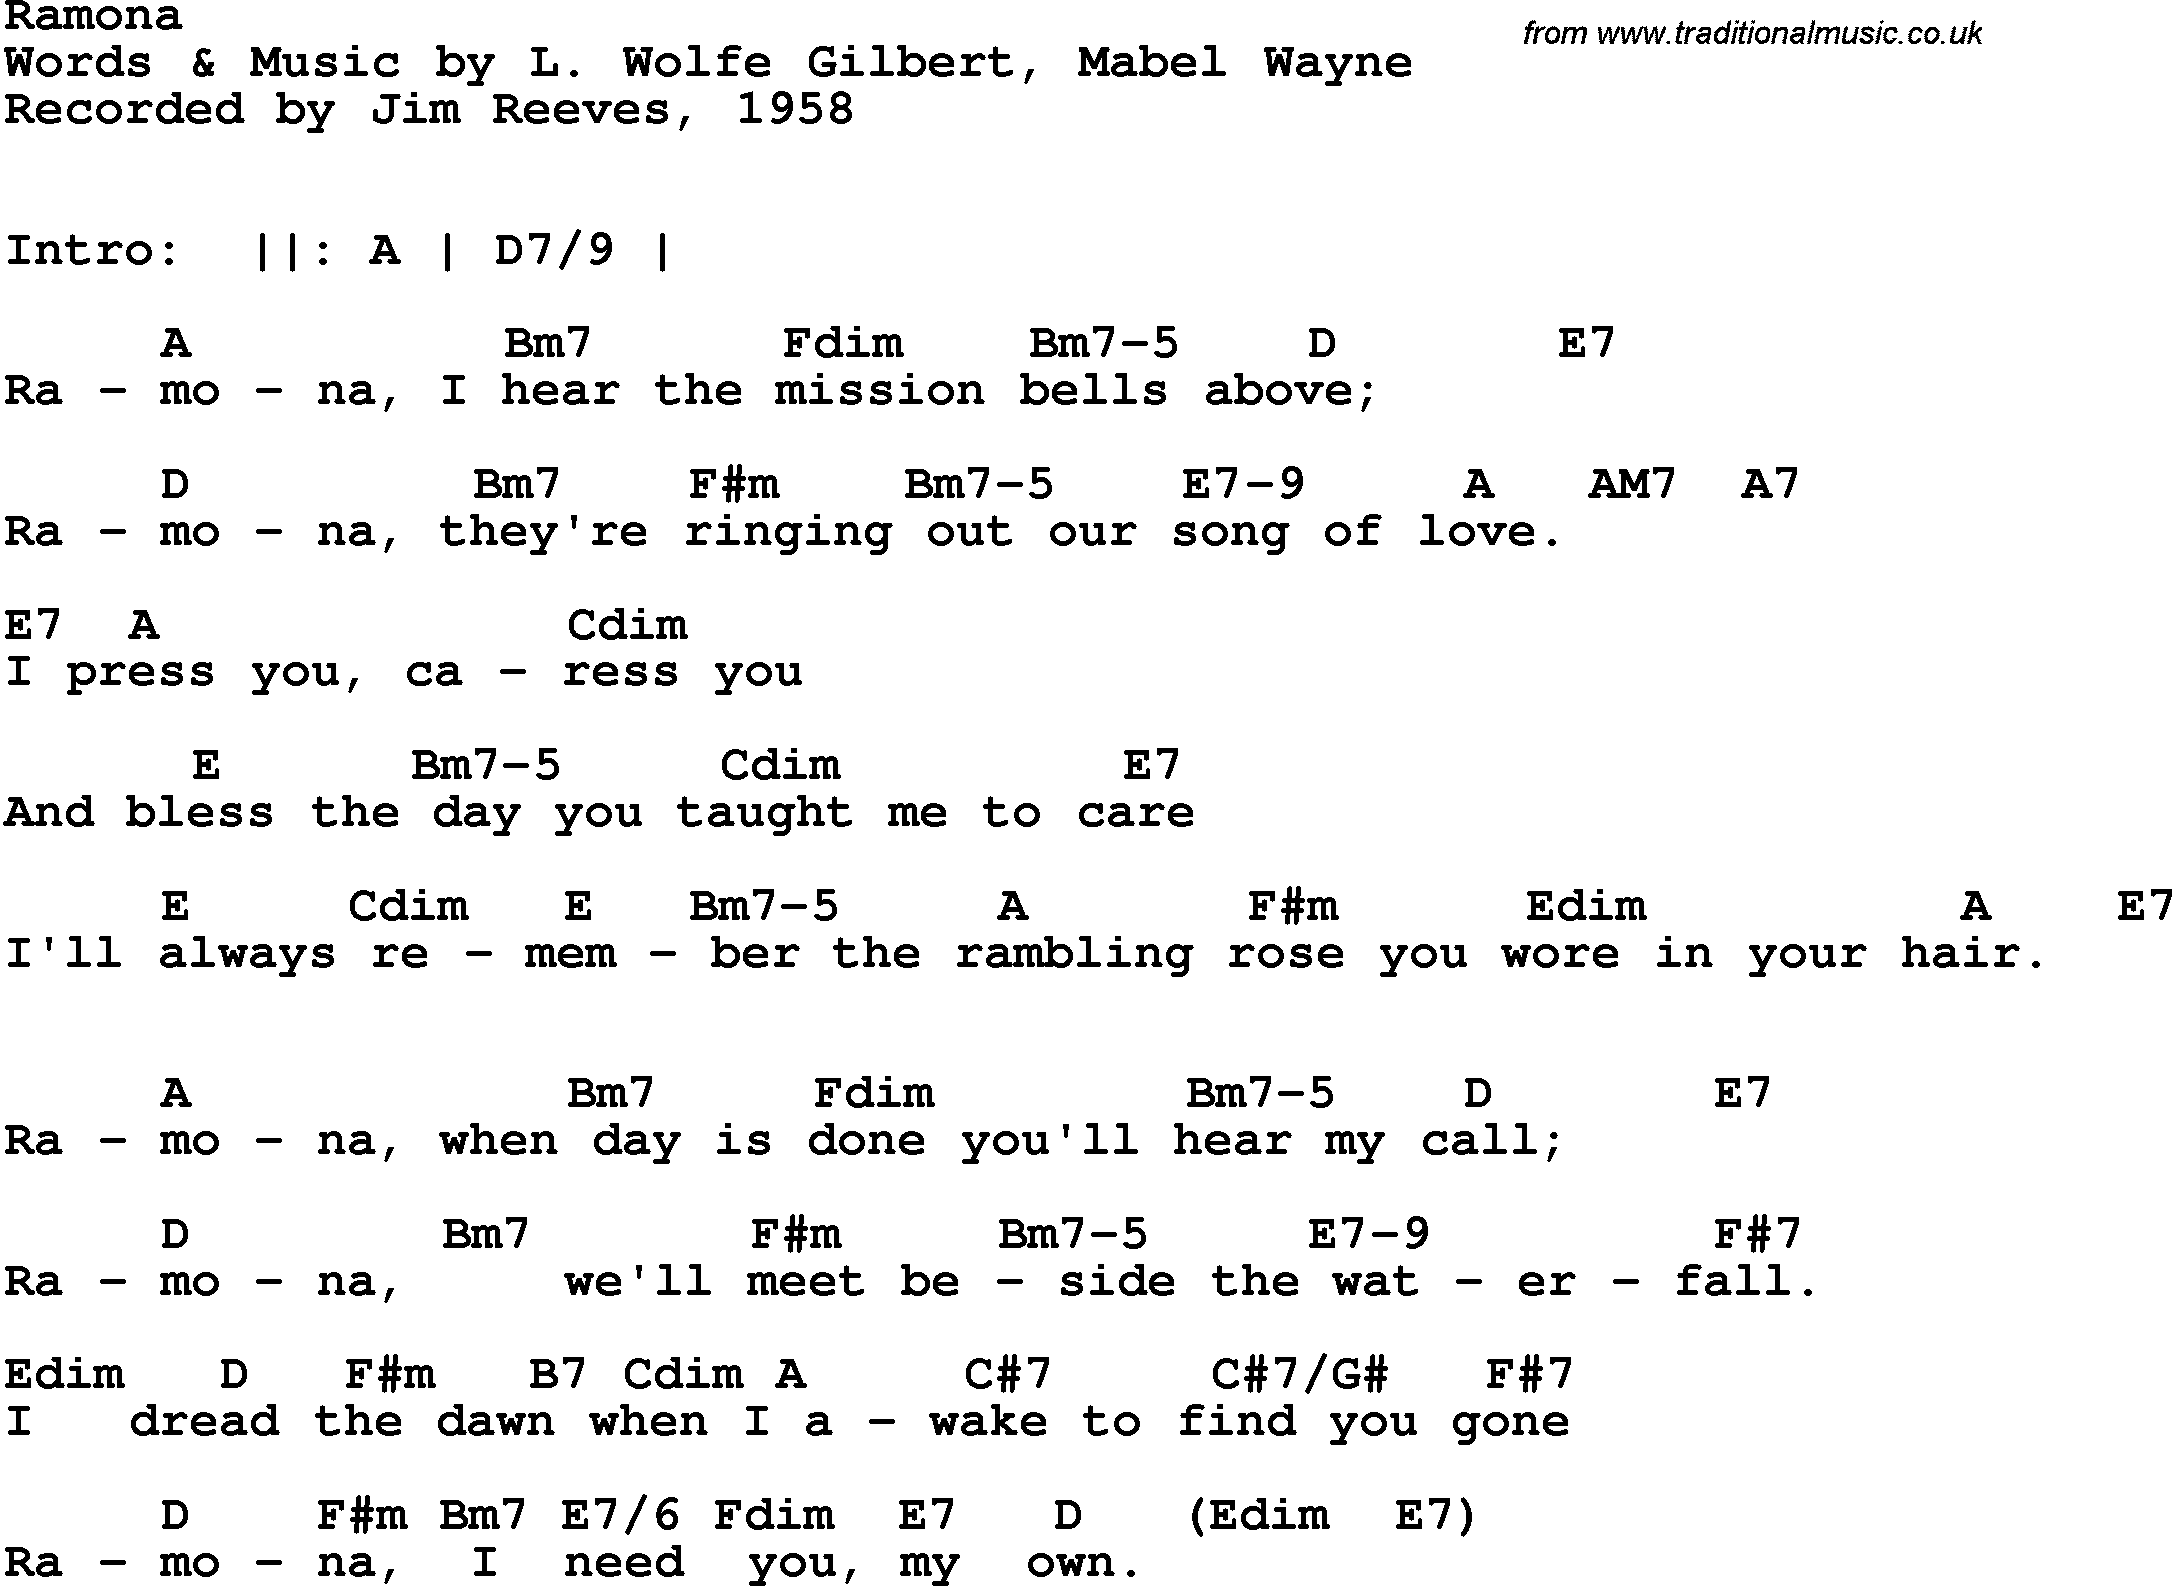 Song lyrics with guitar chords for Ramona - Jim Reeves, 1958